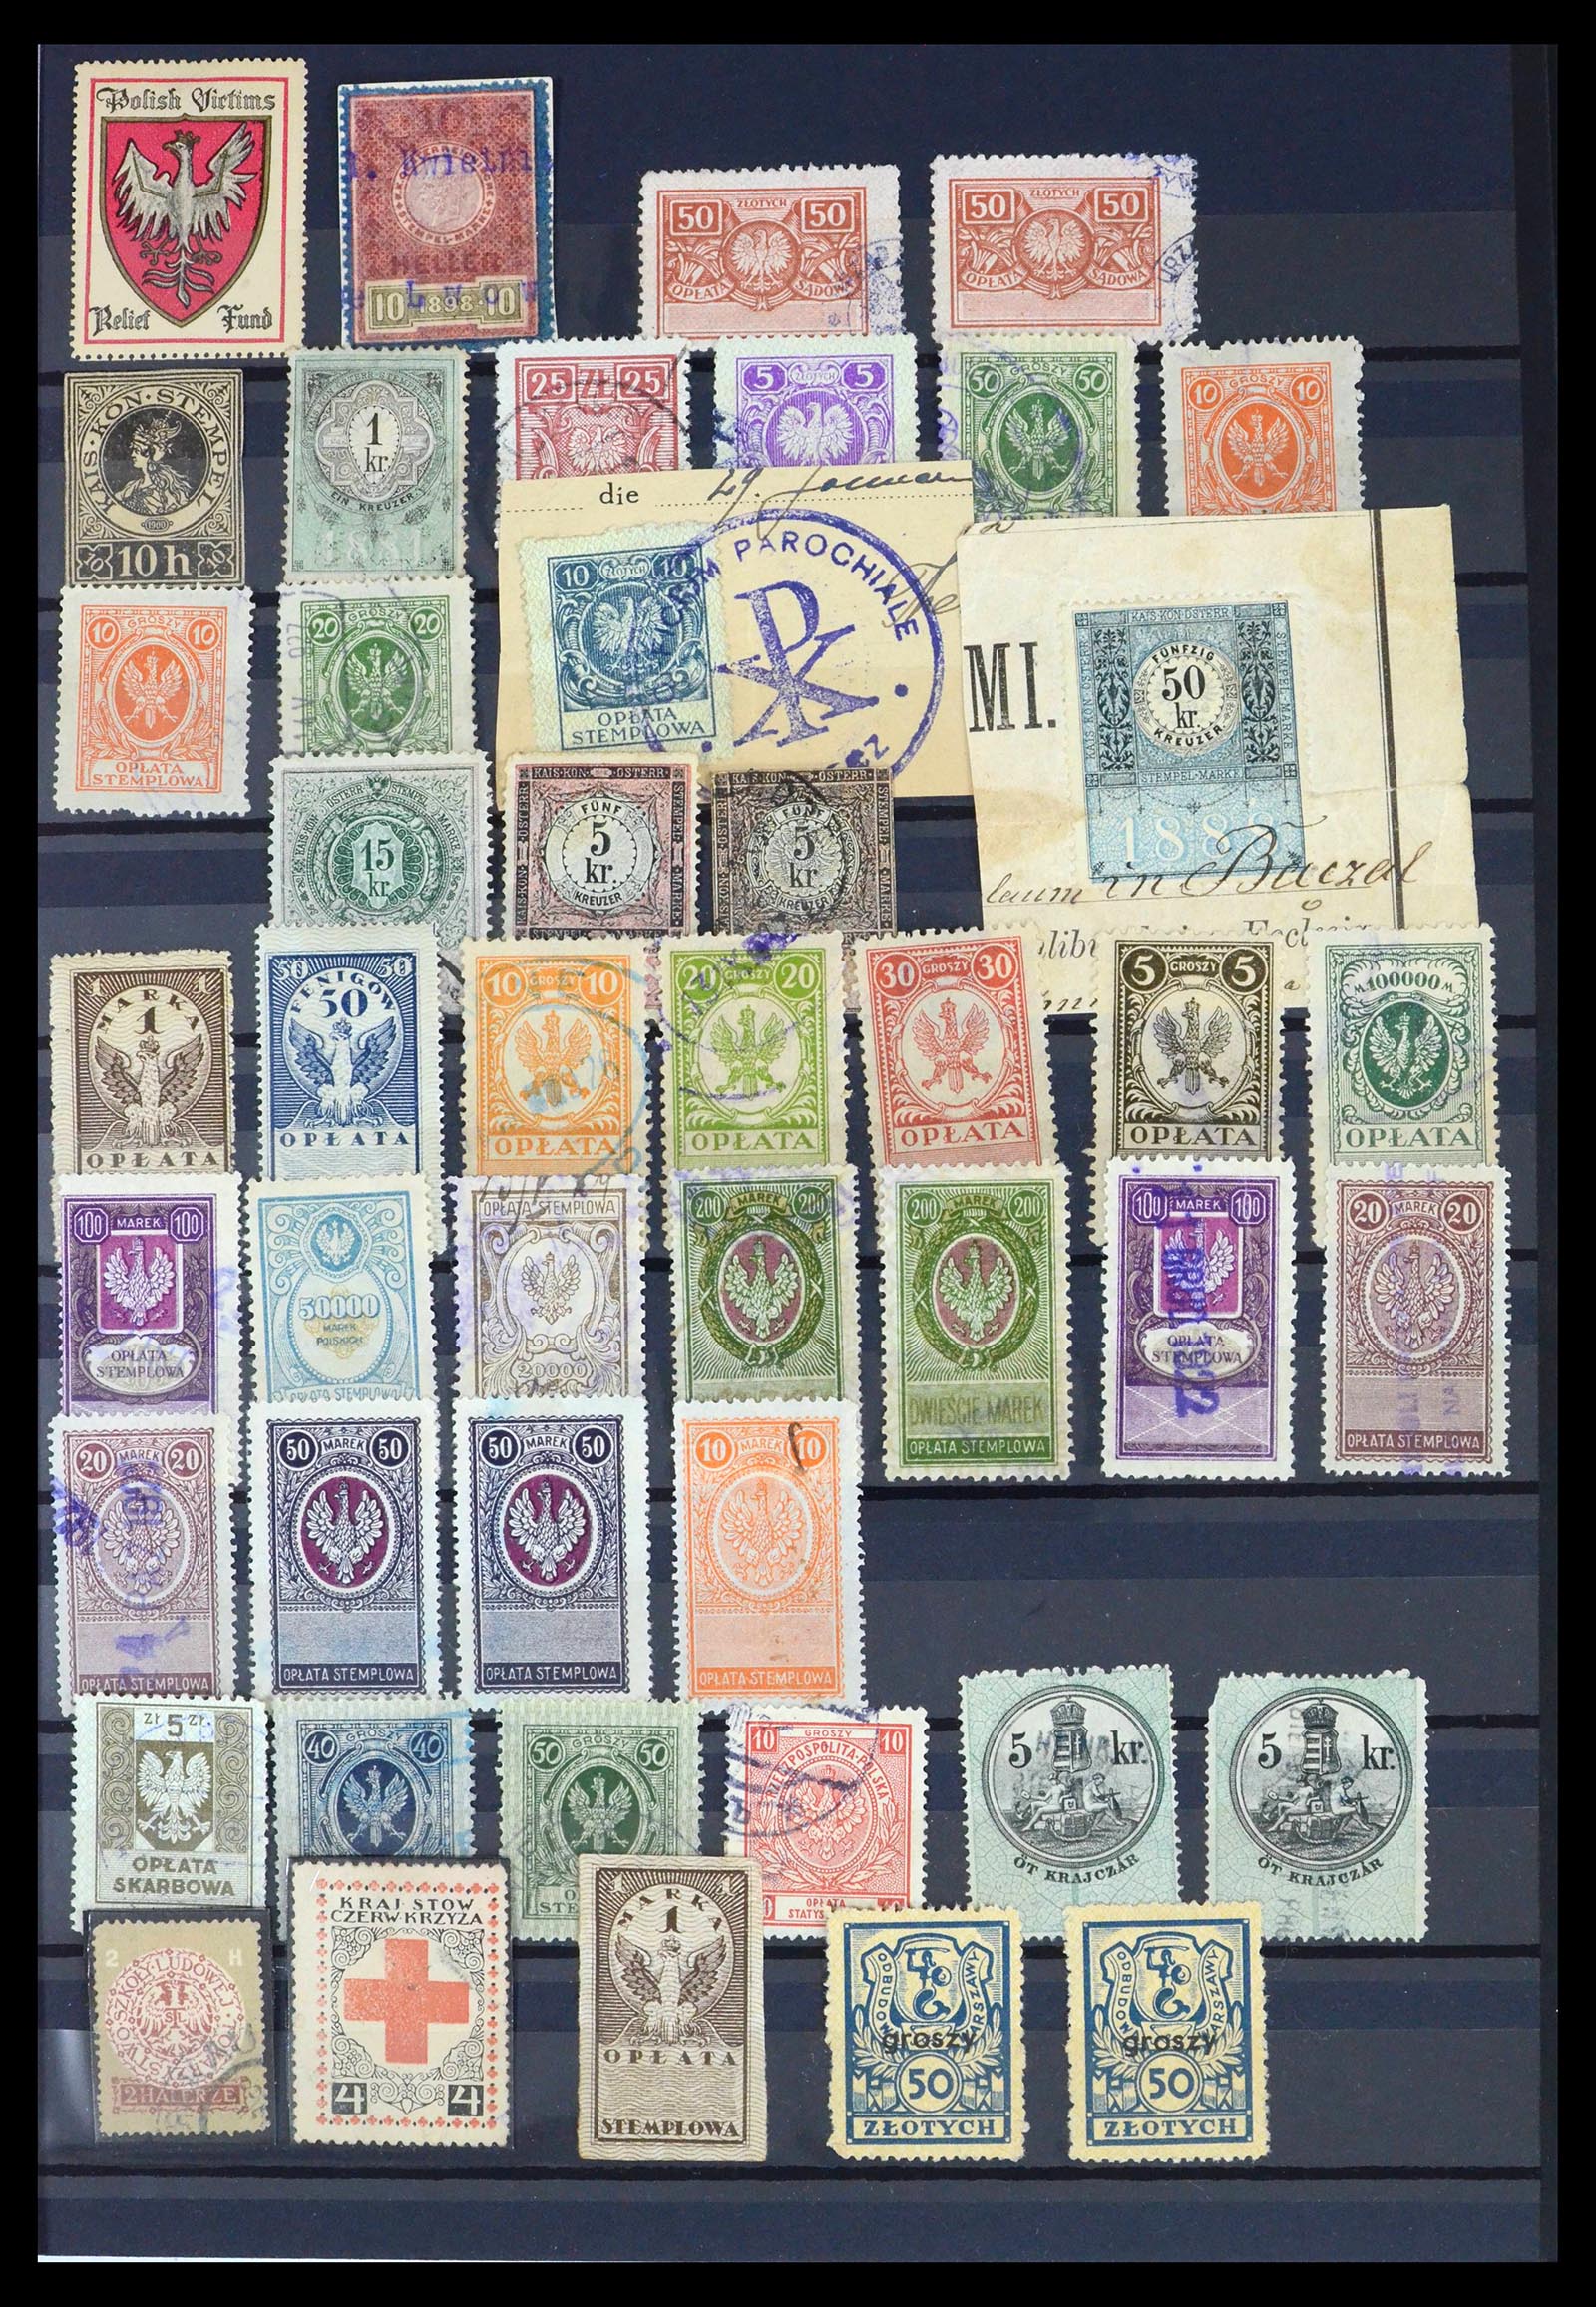 39460 0003 - Stamp collection 39460 Poland 1917-1980.